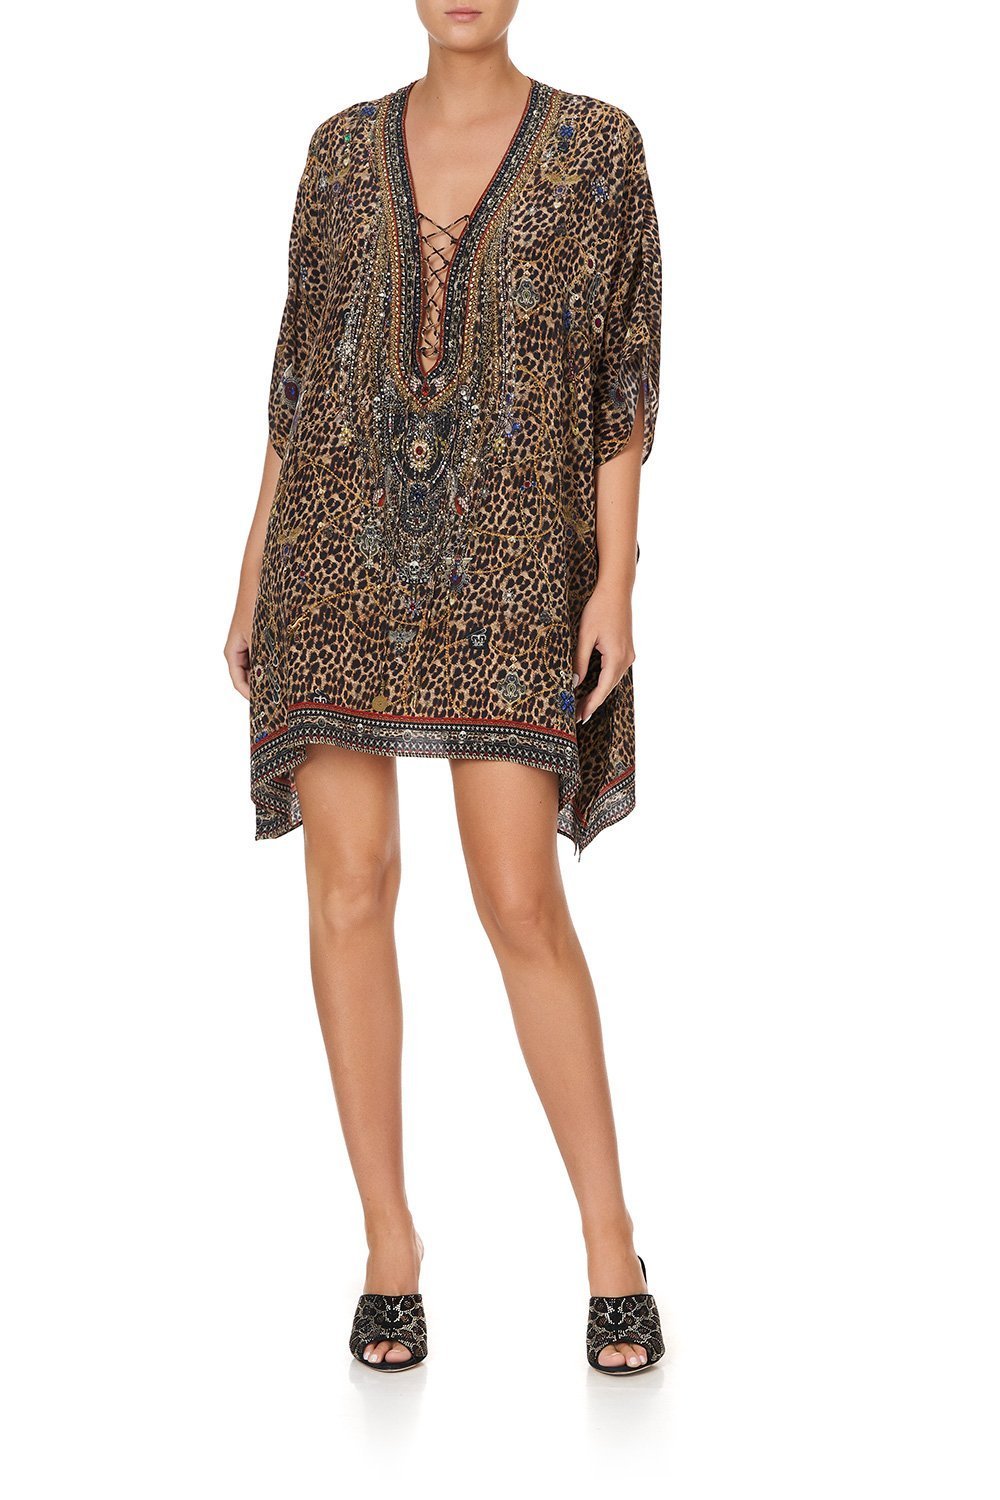 SHORT LACE UP KAFTAN POETIC ANARCHY